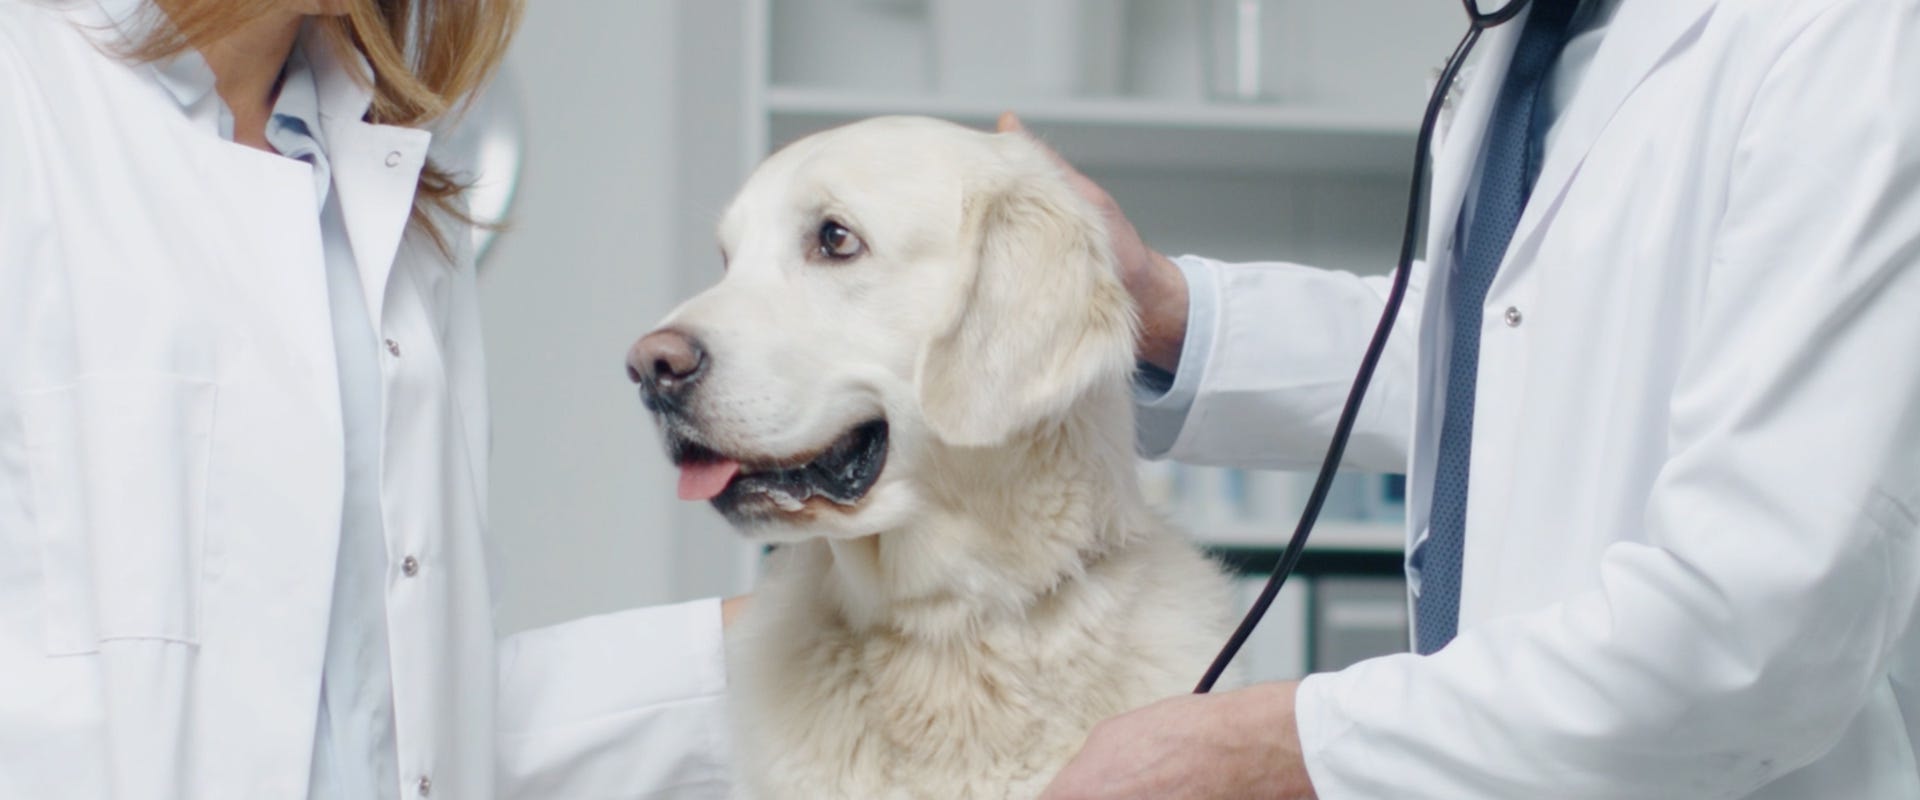 The Mysterious Dog Virus: What You Need to Know